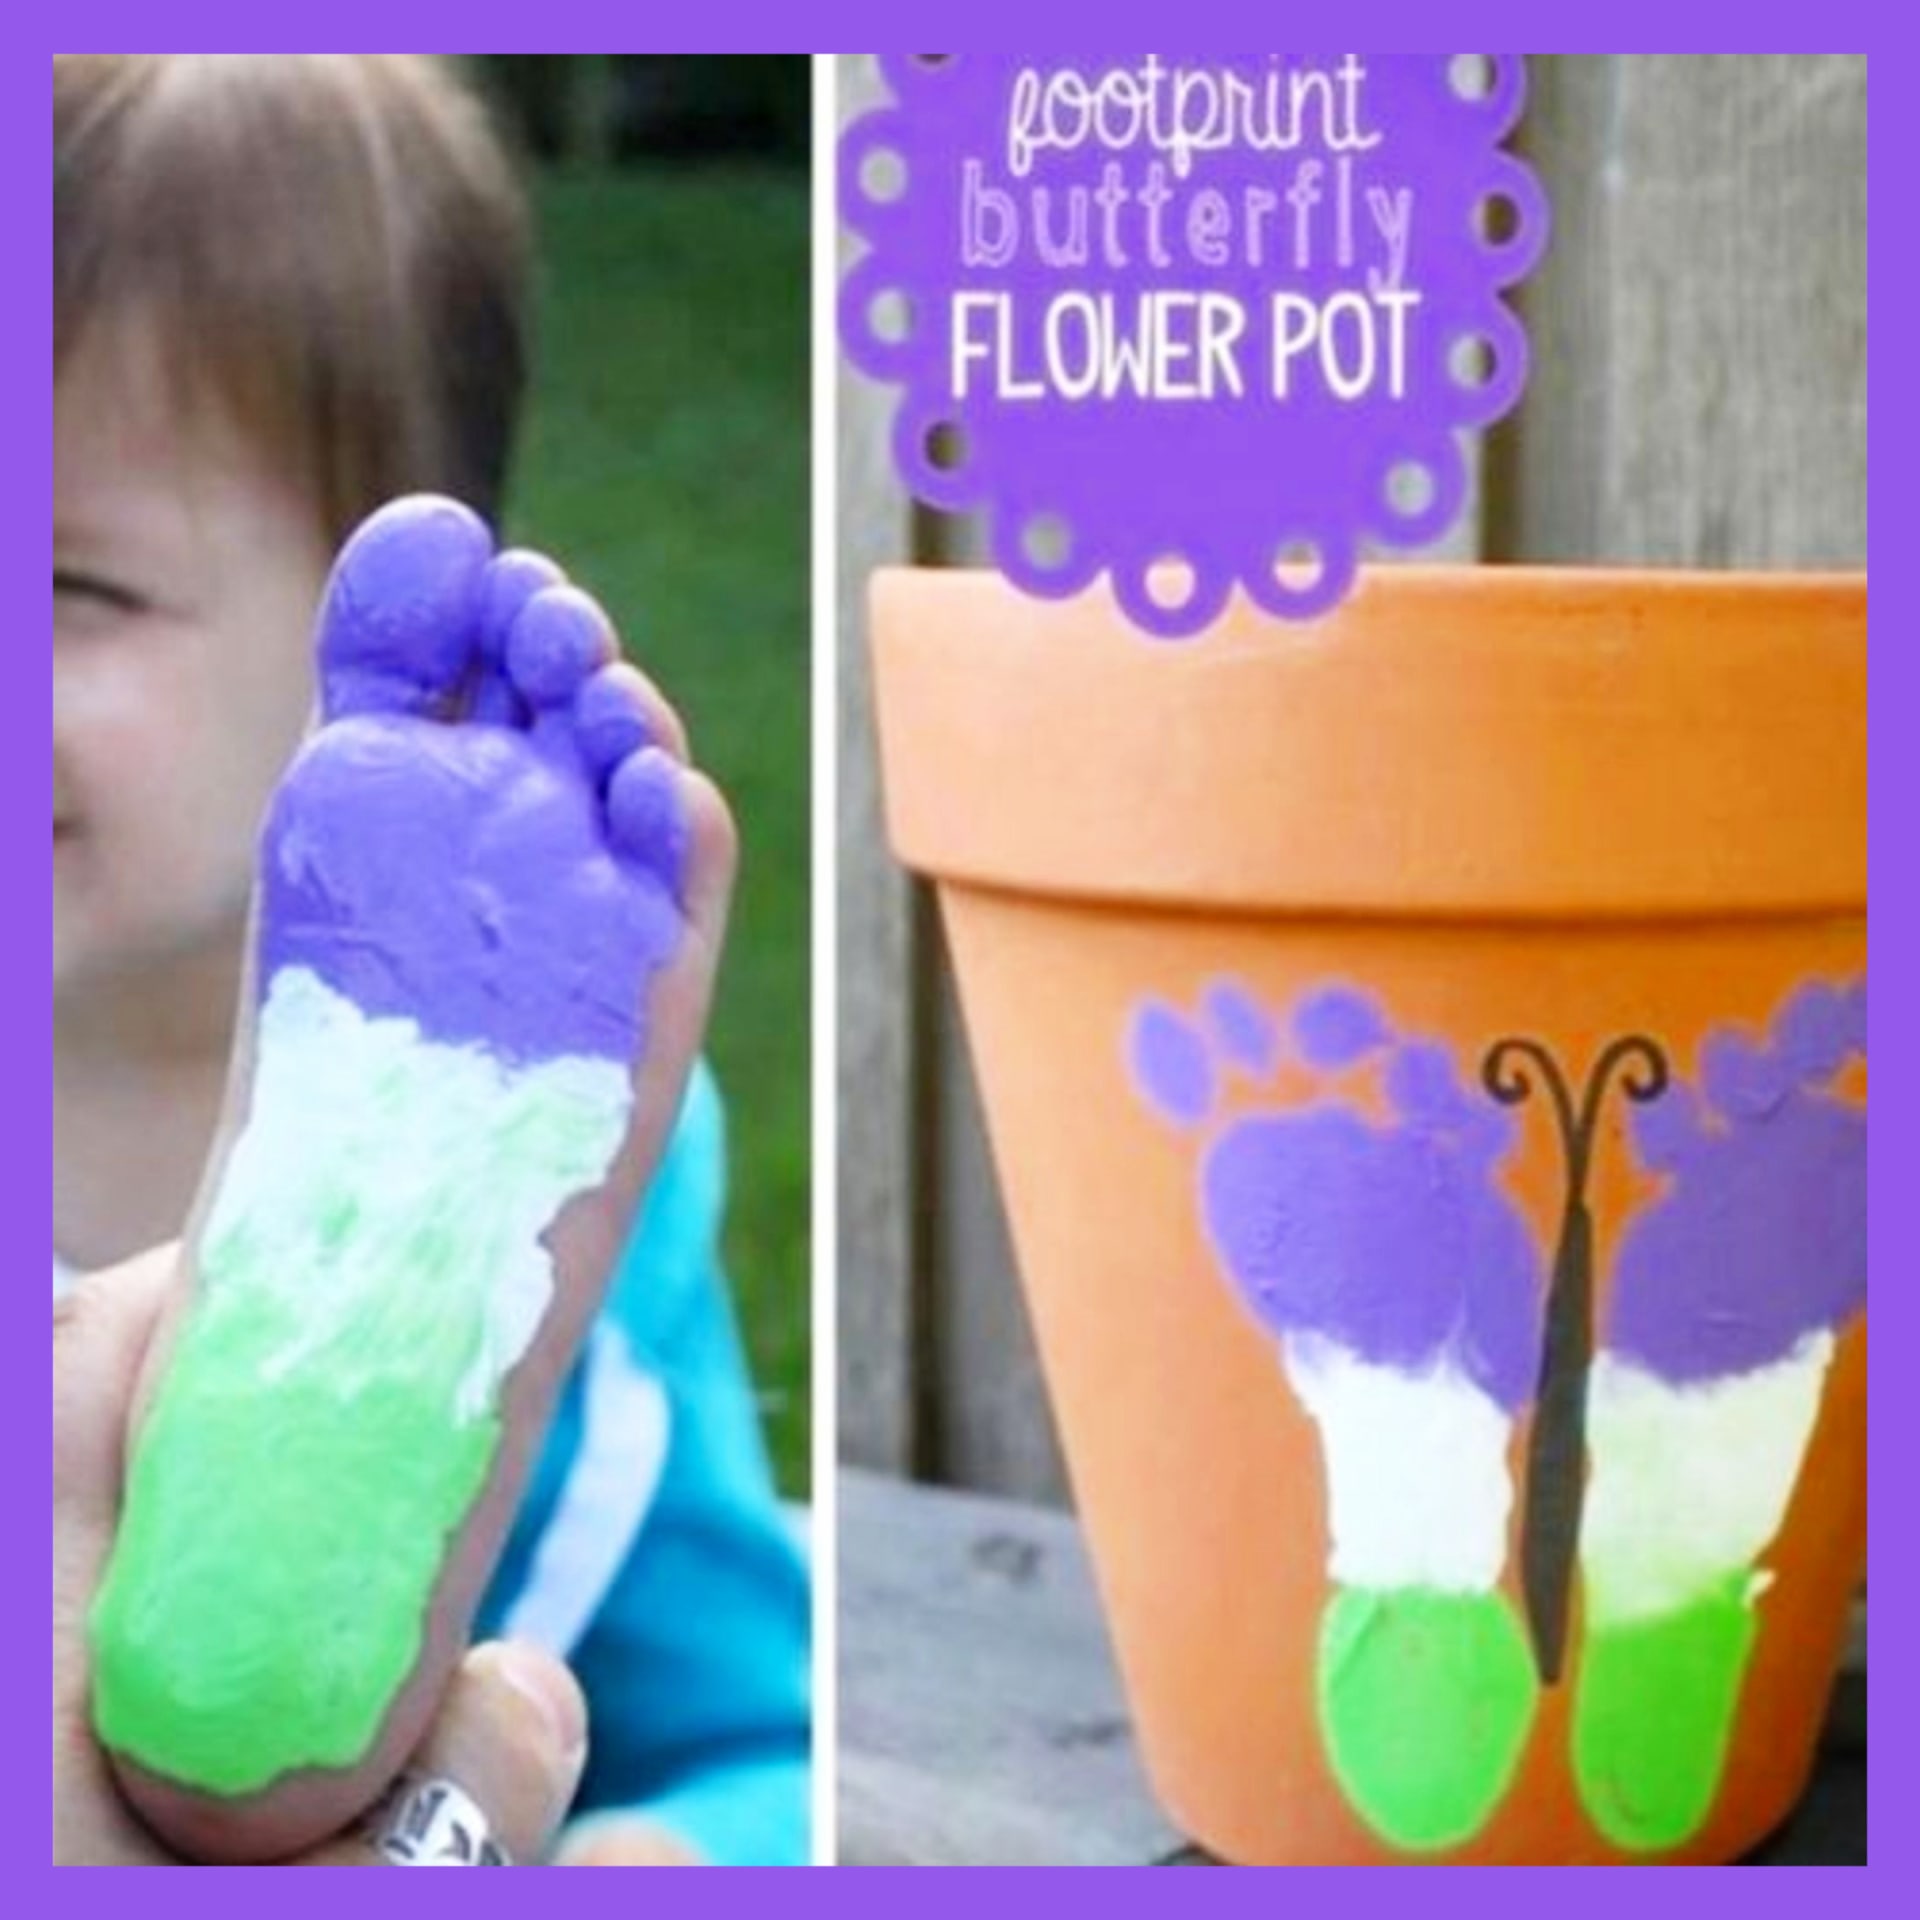 Flower pot crafts - flower pot painting ideas for kids - perfect for Mother's Day - flower pot gift ideas